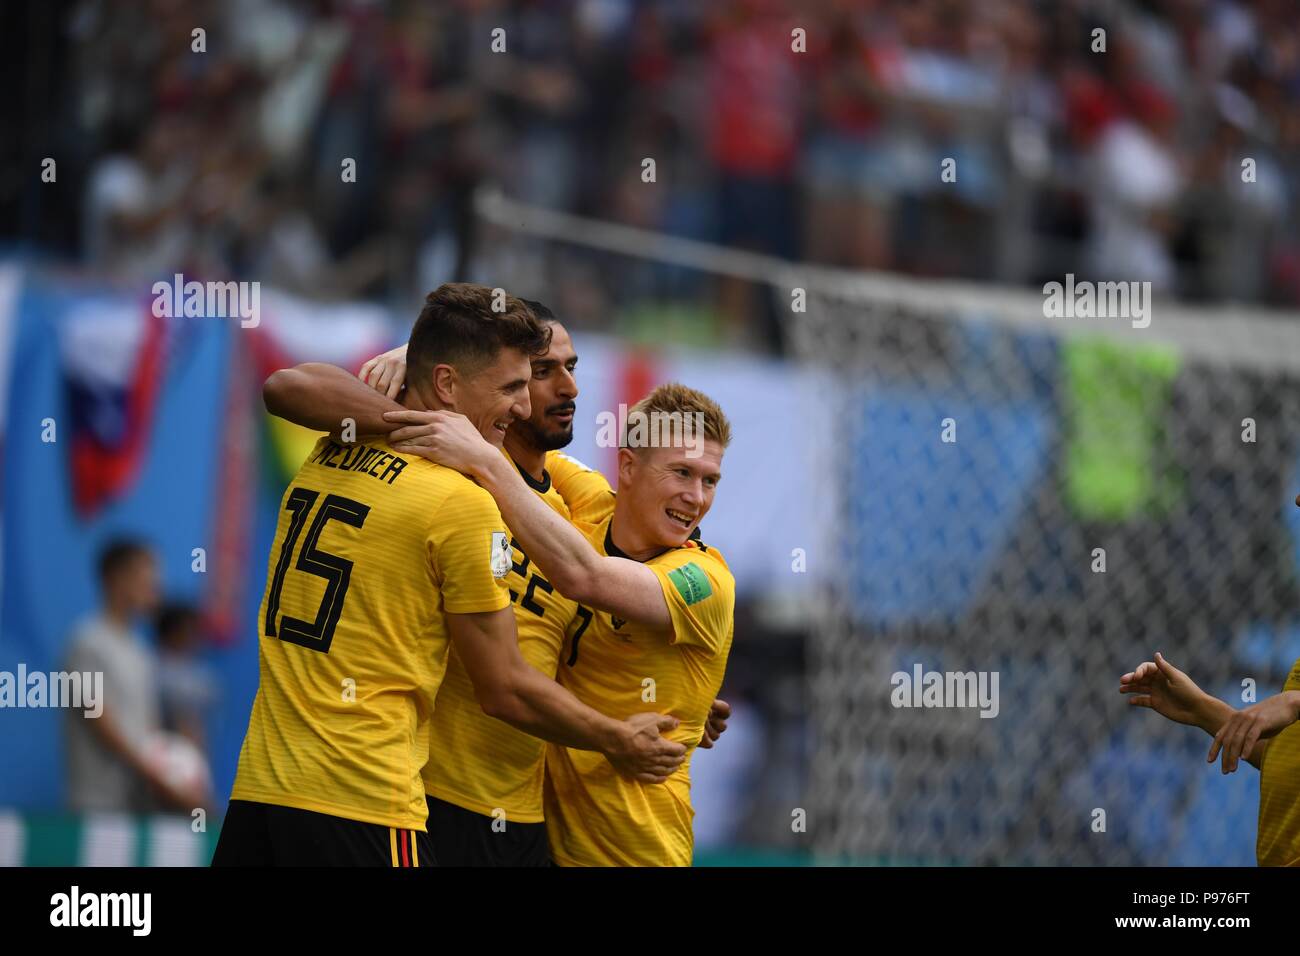 July 14th, 2018, St Petersburg, Russia. Thomas Meunier and his team mates are celebrate after his first goal of match during 2018 FIFA World Cup Russia Final match between England and Belgium at Saint-Petersburg Stadium, Russia. Shoja Lak/Alamy Live News Stock Photo